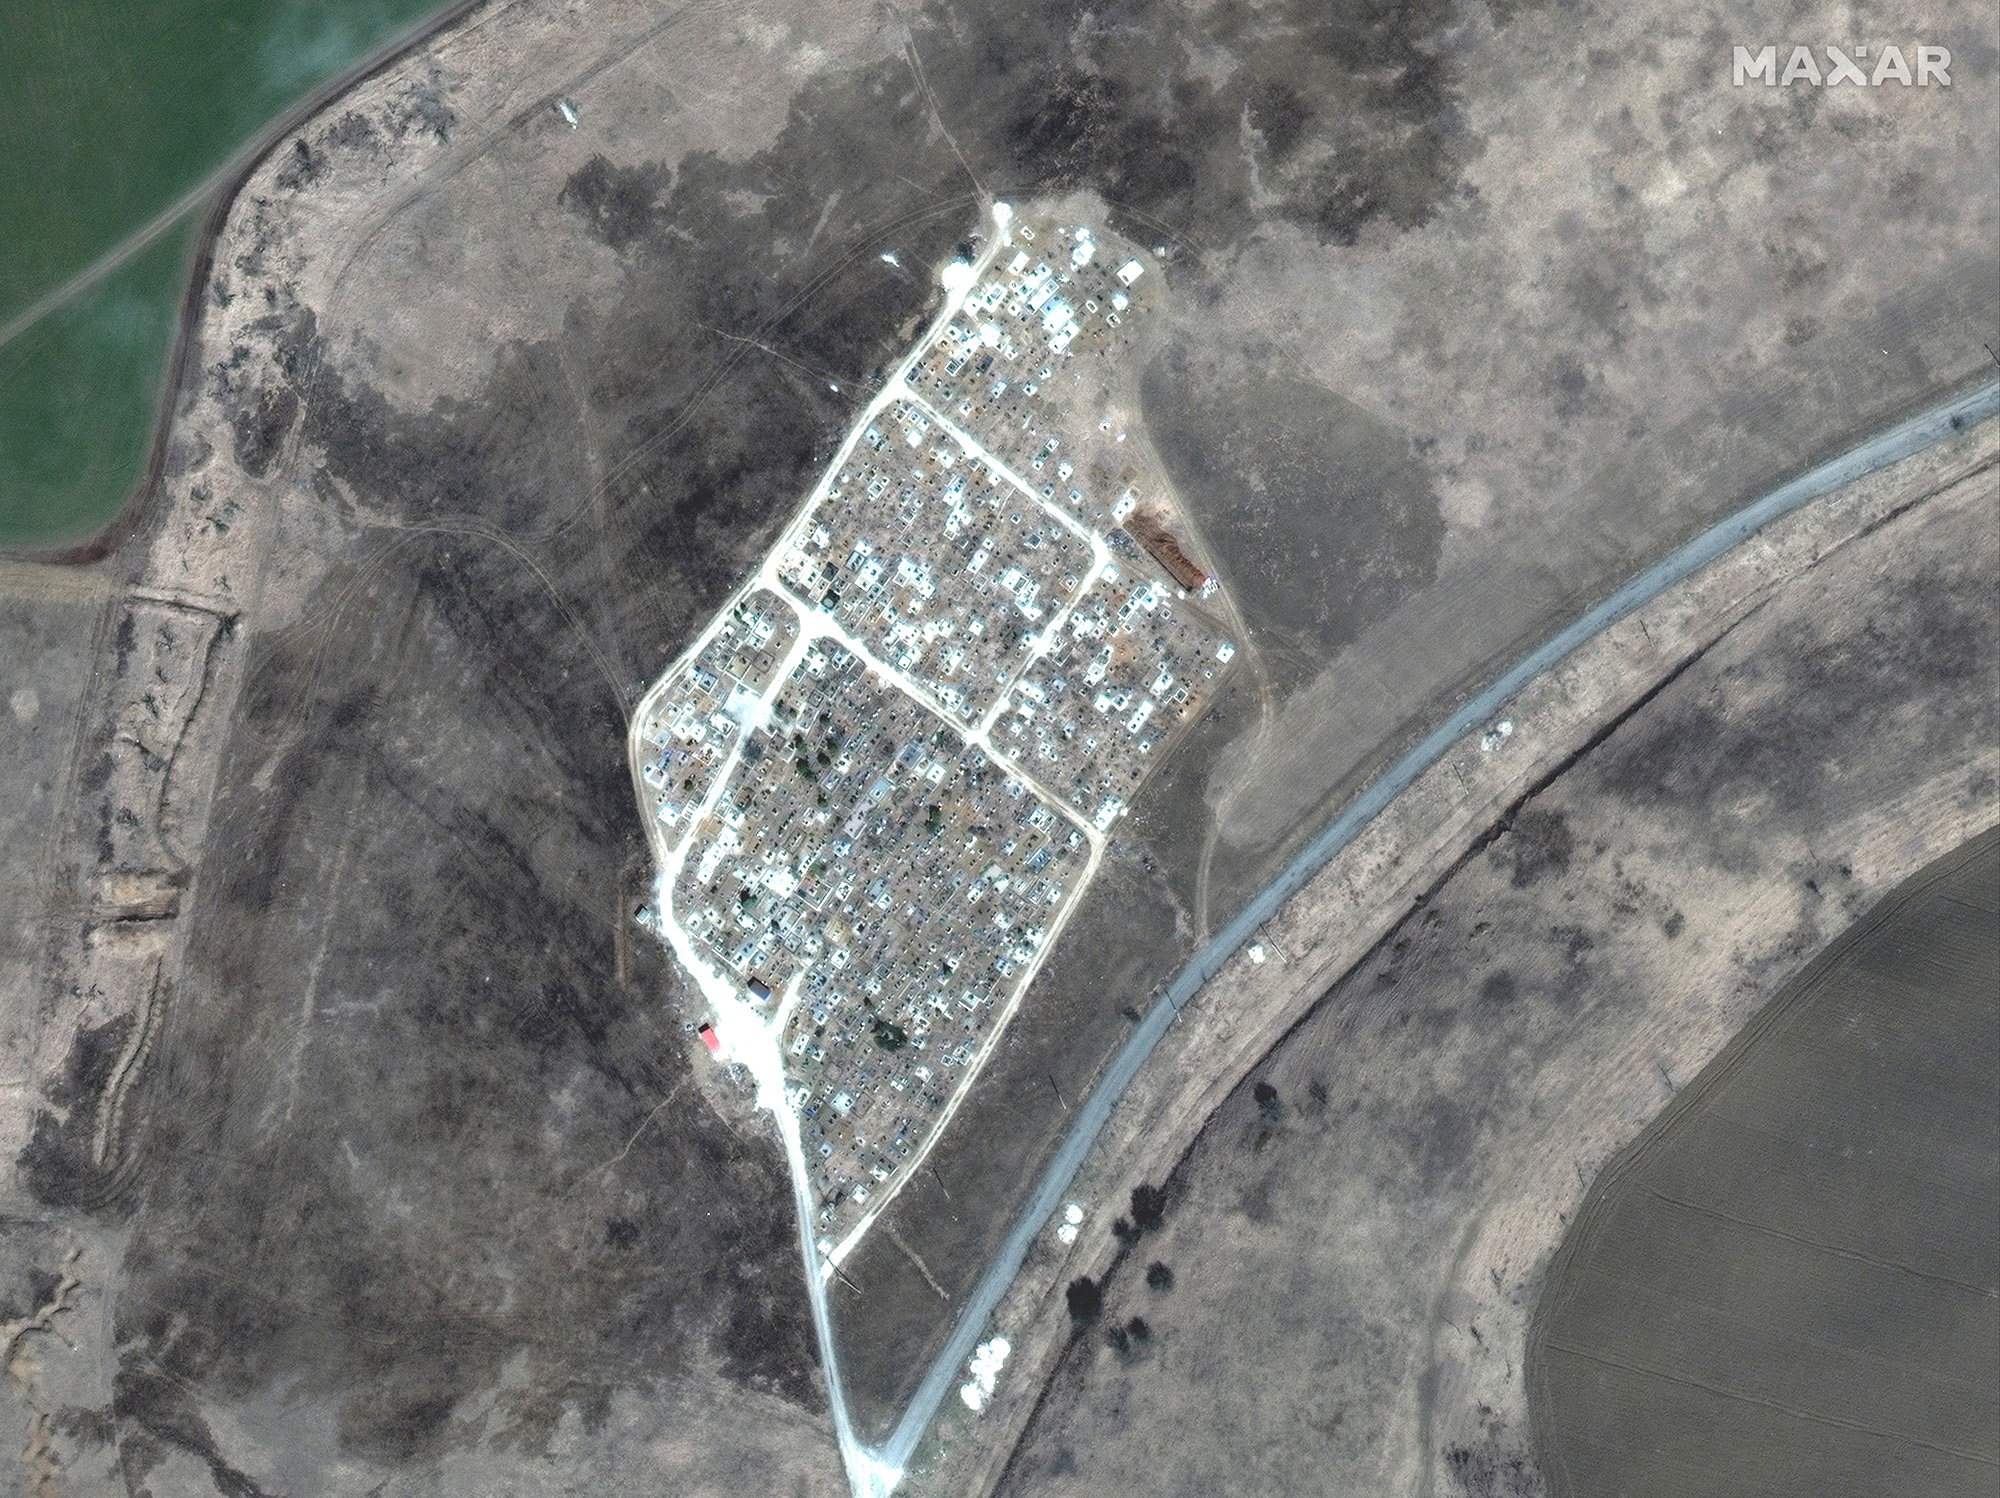 A satellite image shows the expansion of new graves at a cemetery in Vynohradne, near Mariupol, Ukraine, on March 29.